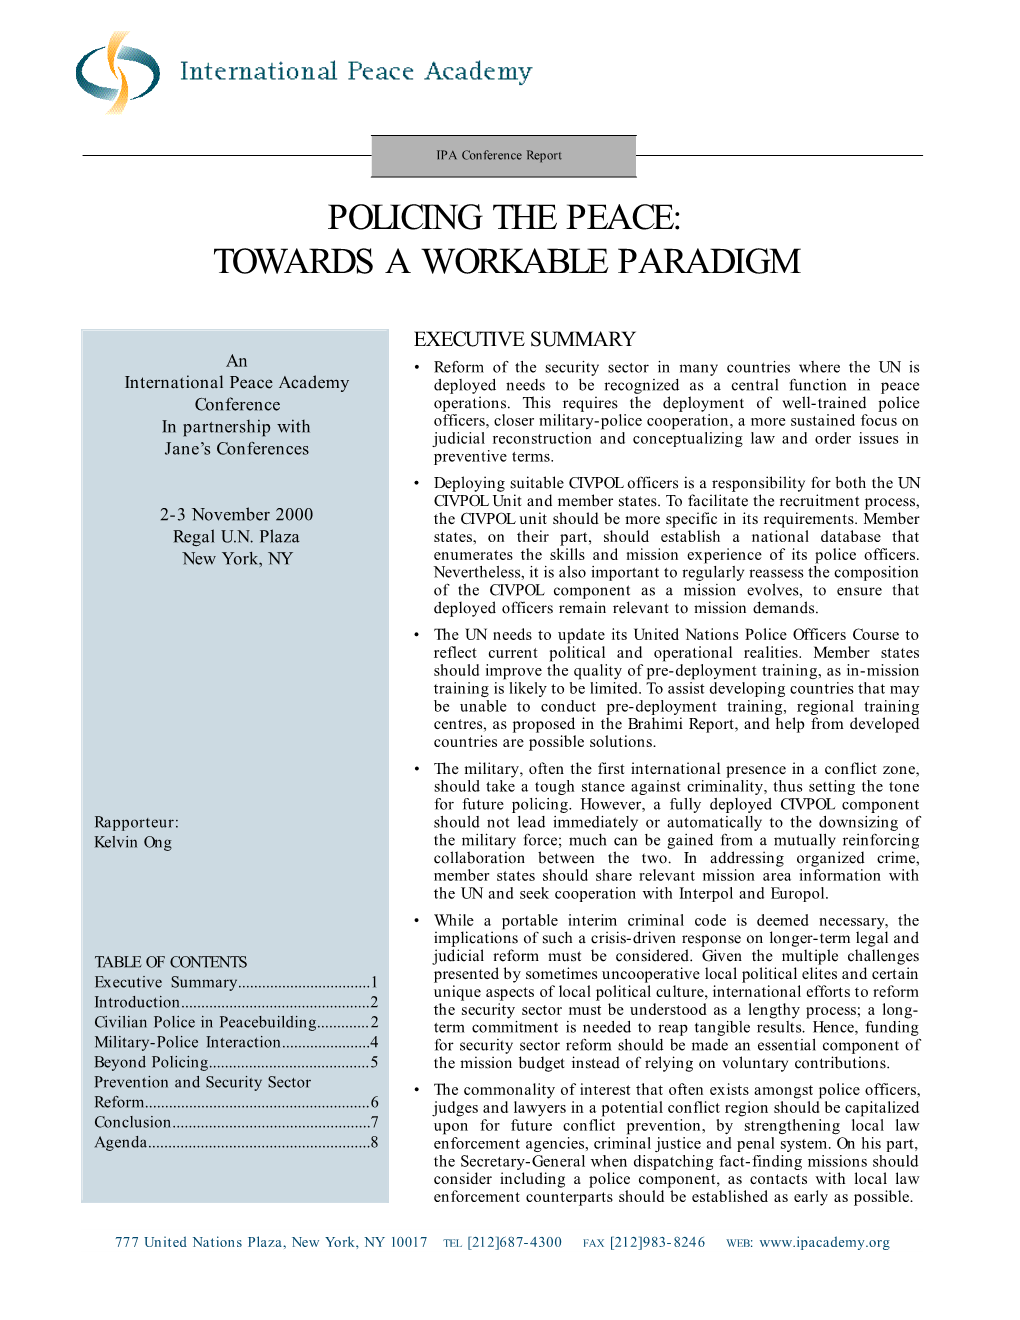 Policing the Peace: Towards a Workable Paradigm